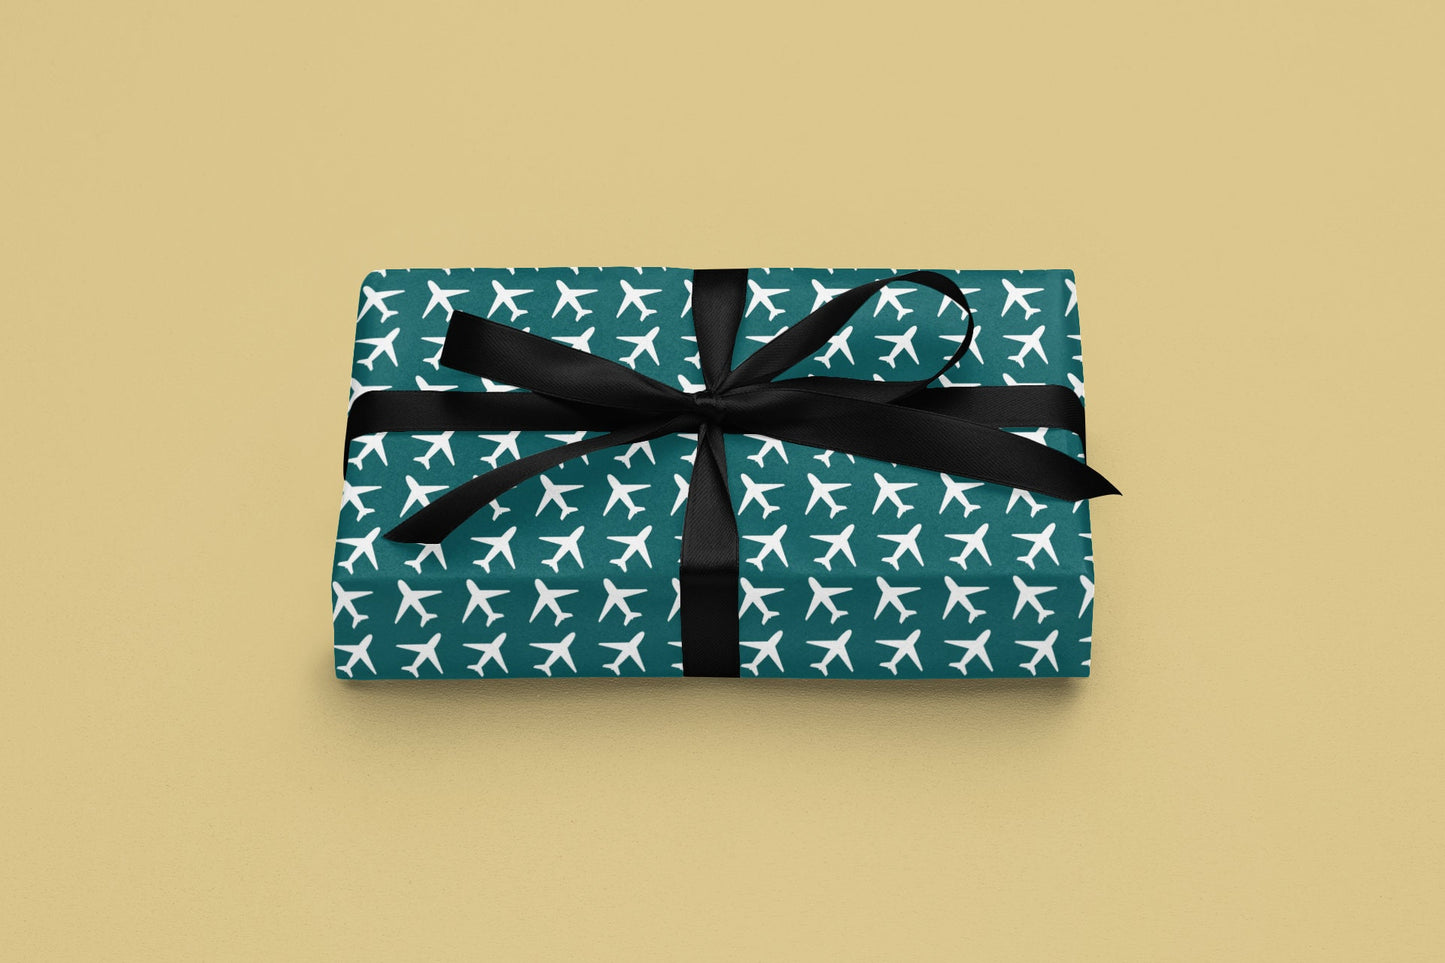 Aviation Themed Wrapping Paper | Cabin Crew Flight Attendant Gift Wrap | Pilot, Aircraft Wrapping Paper | Birthday Christmas Gift Wrap